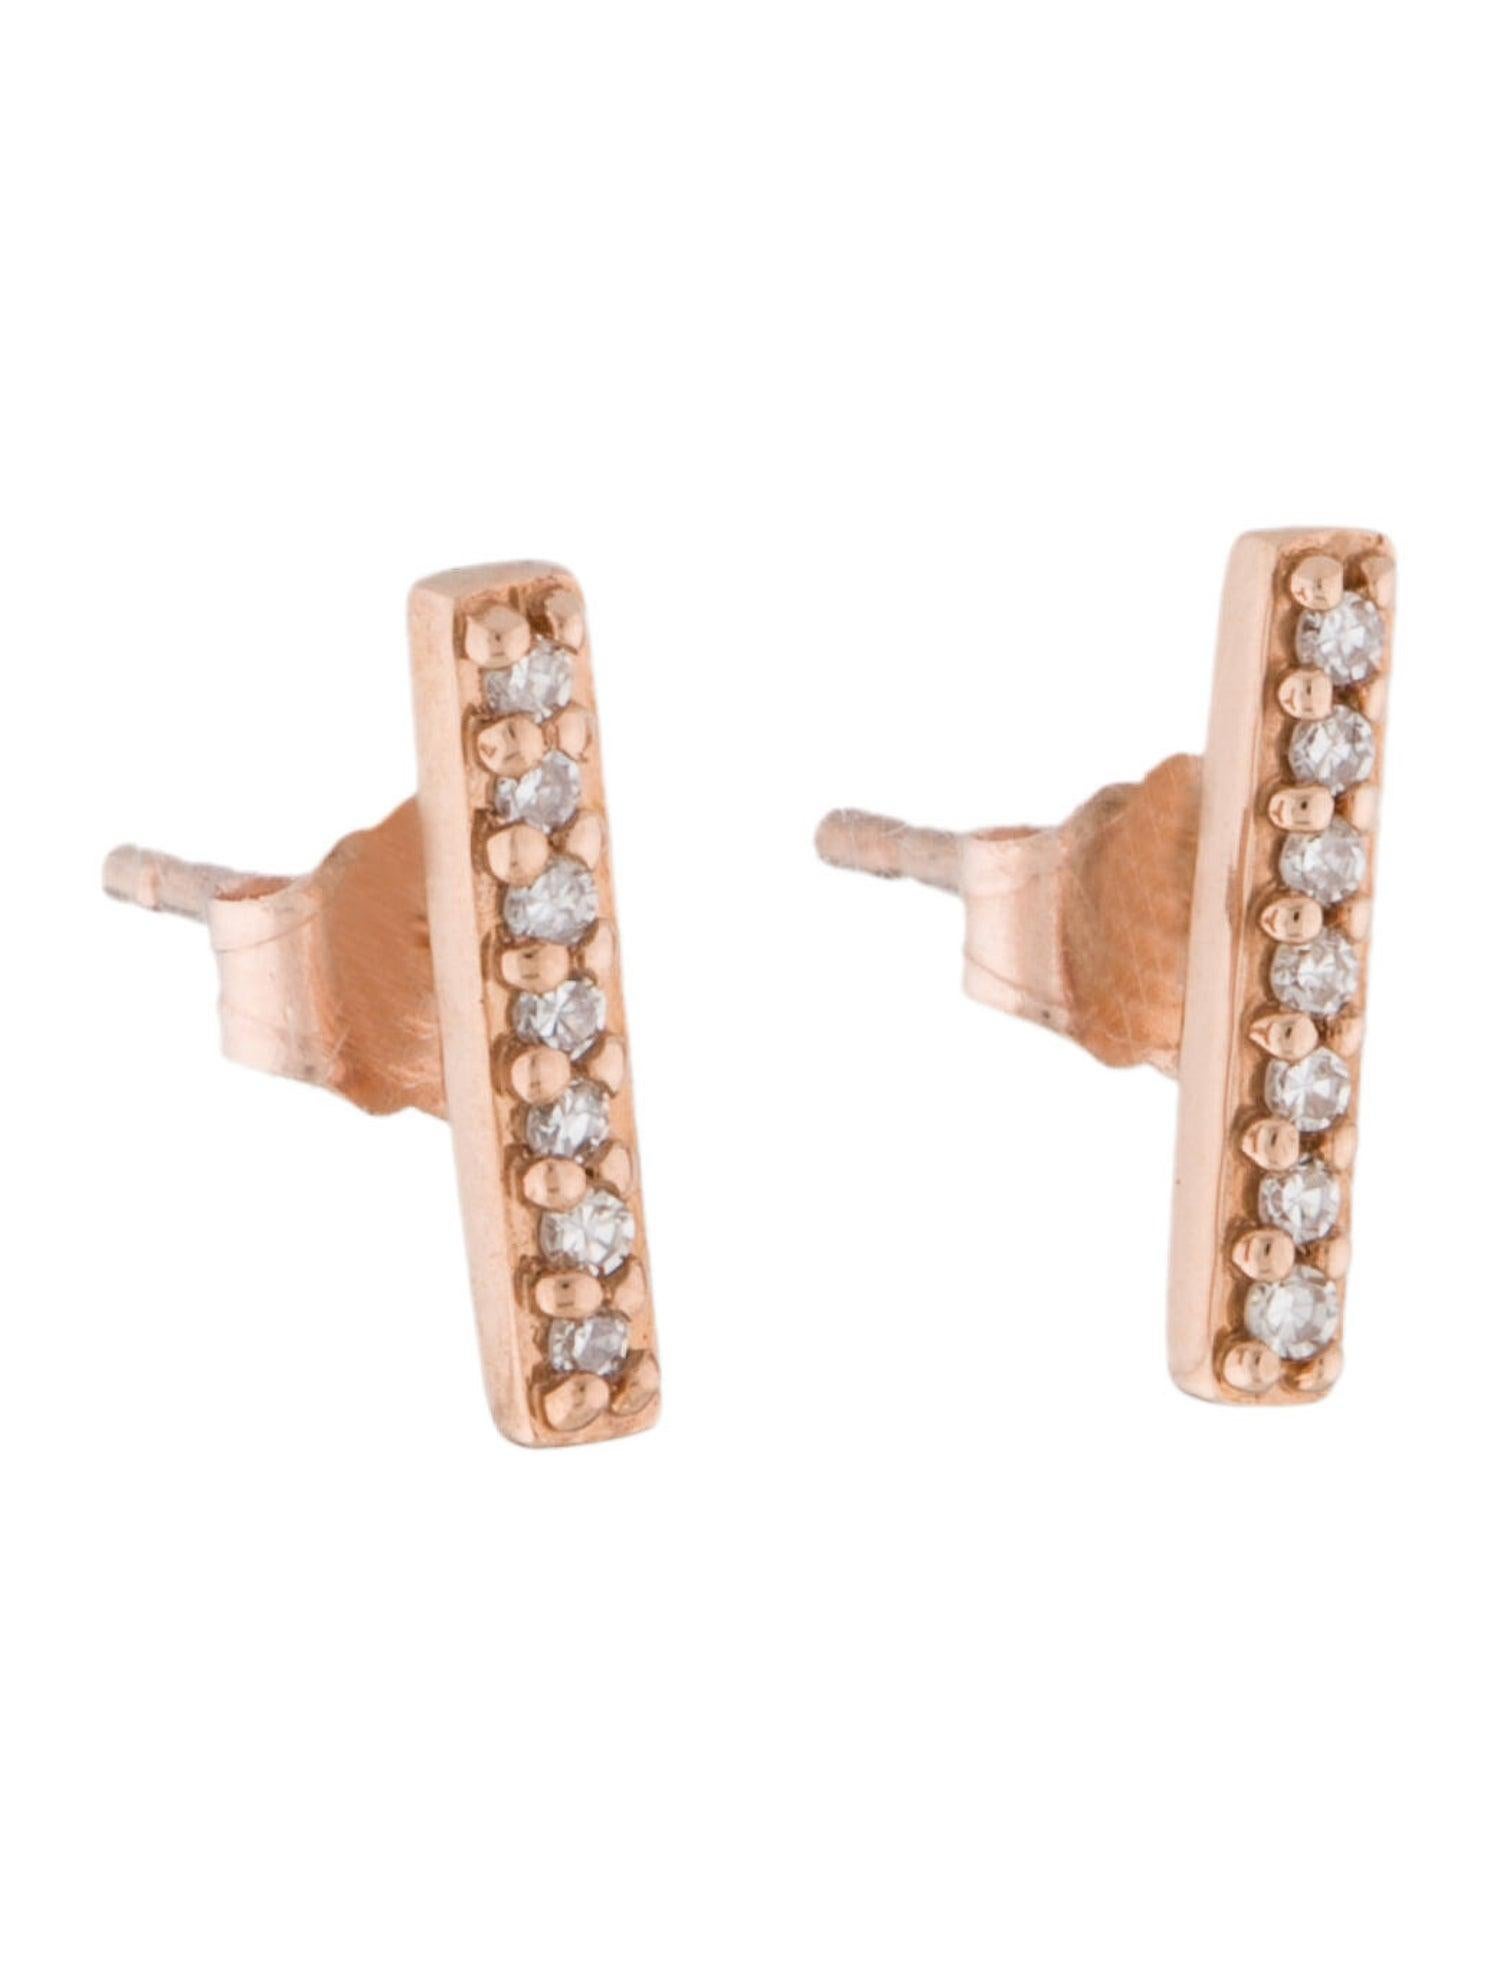 14k Rose Gold 0.07 Carat Diamond Bar Earrings In New Condition For Sale In Great neck, NY